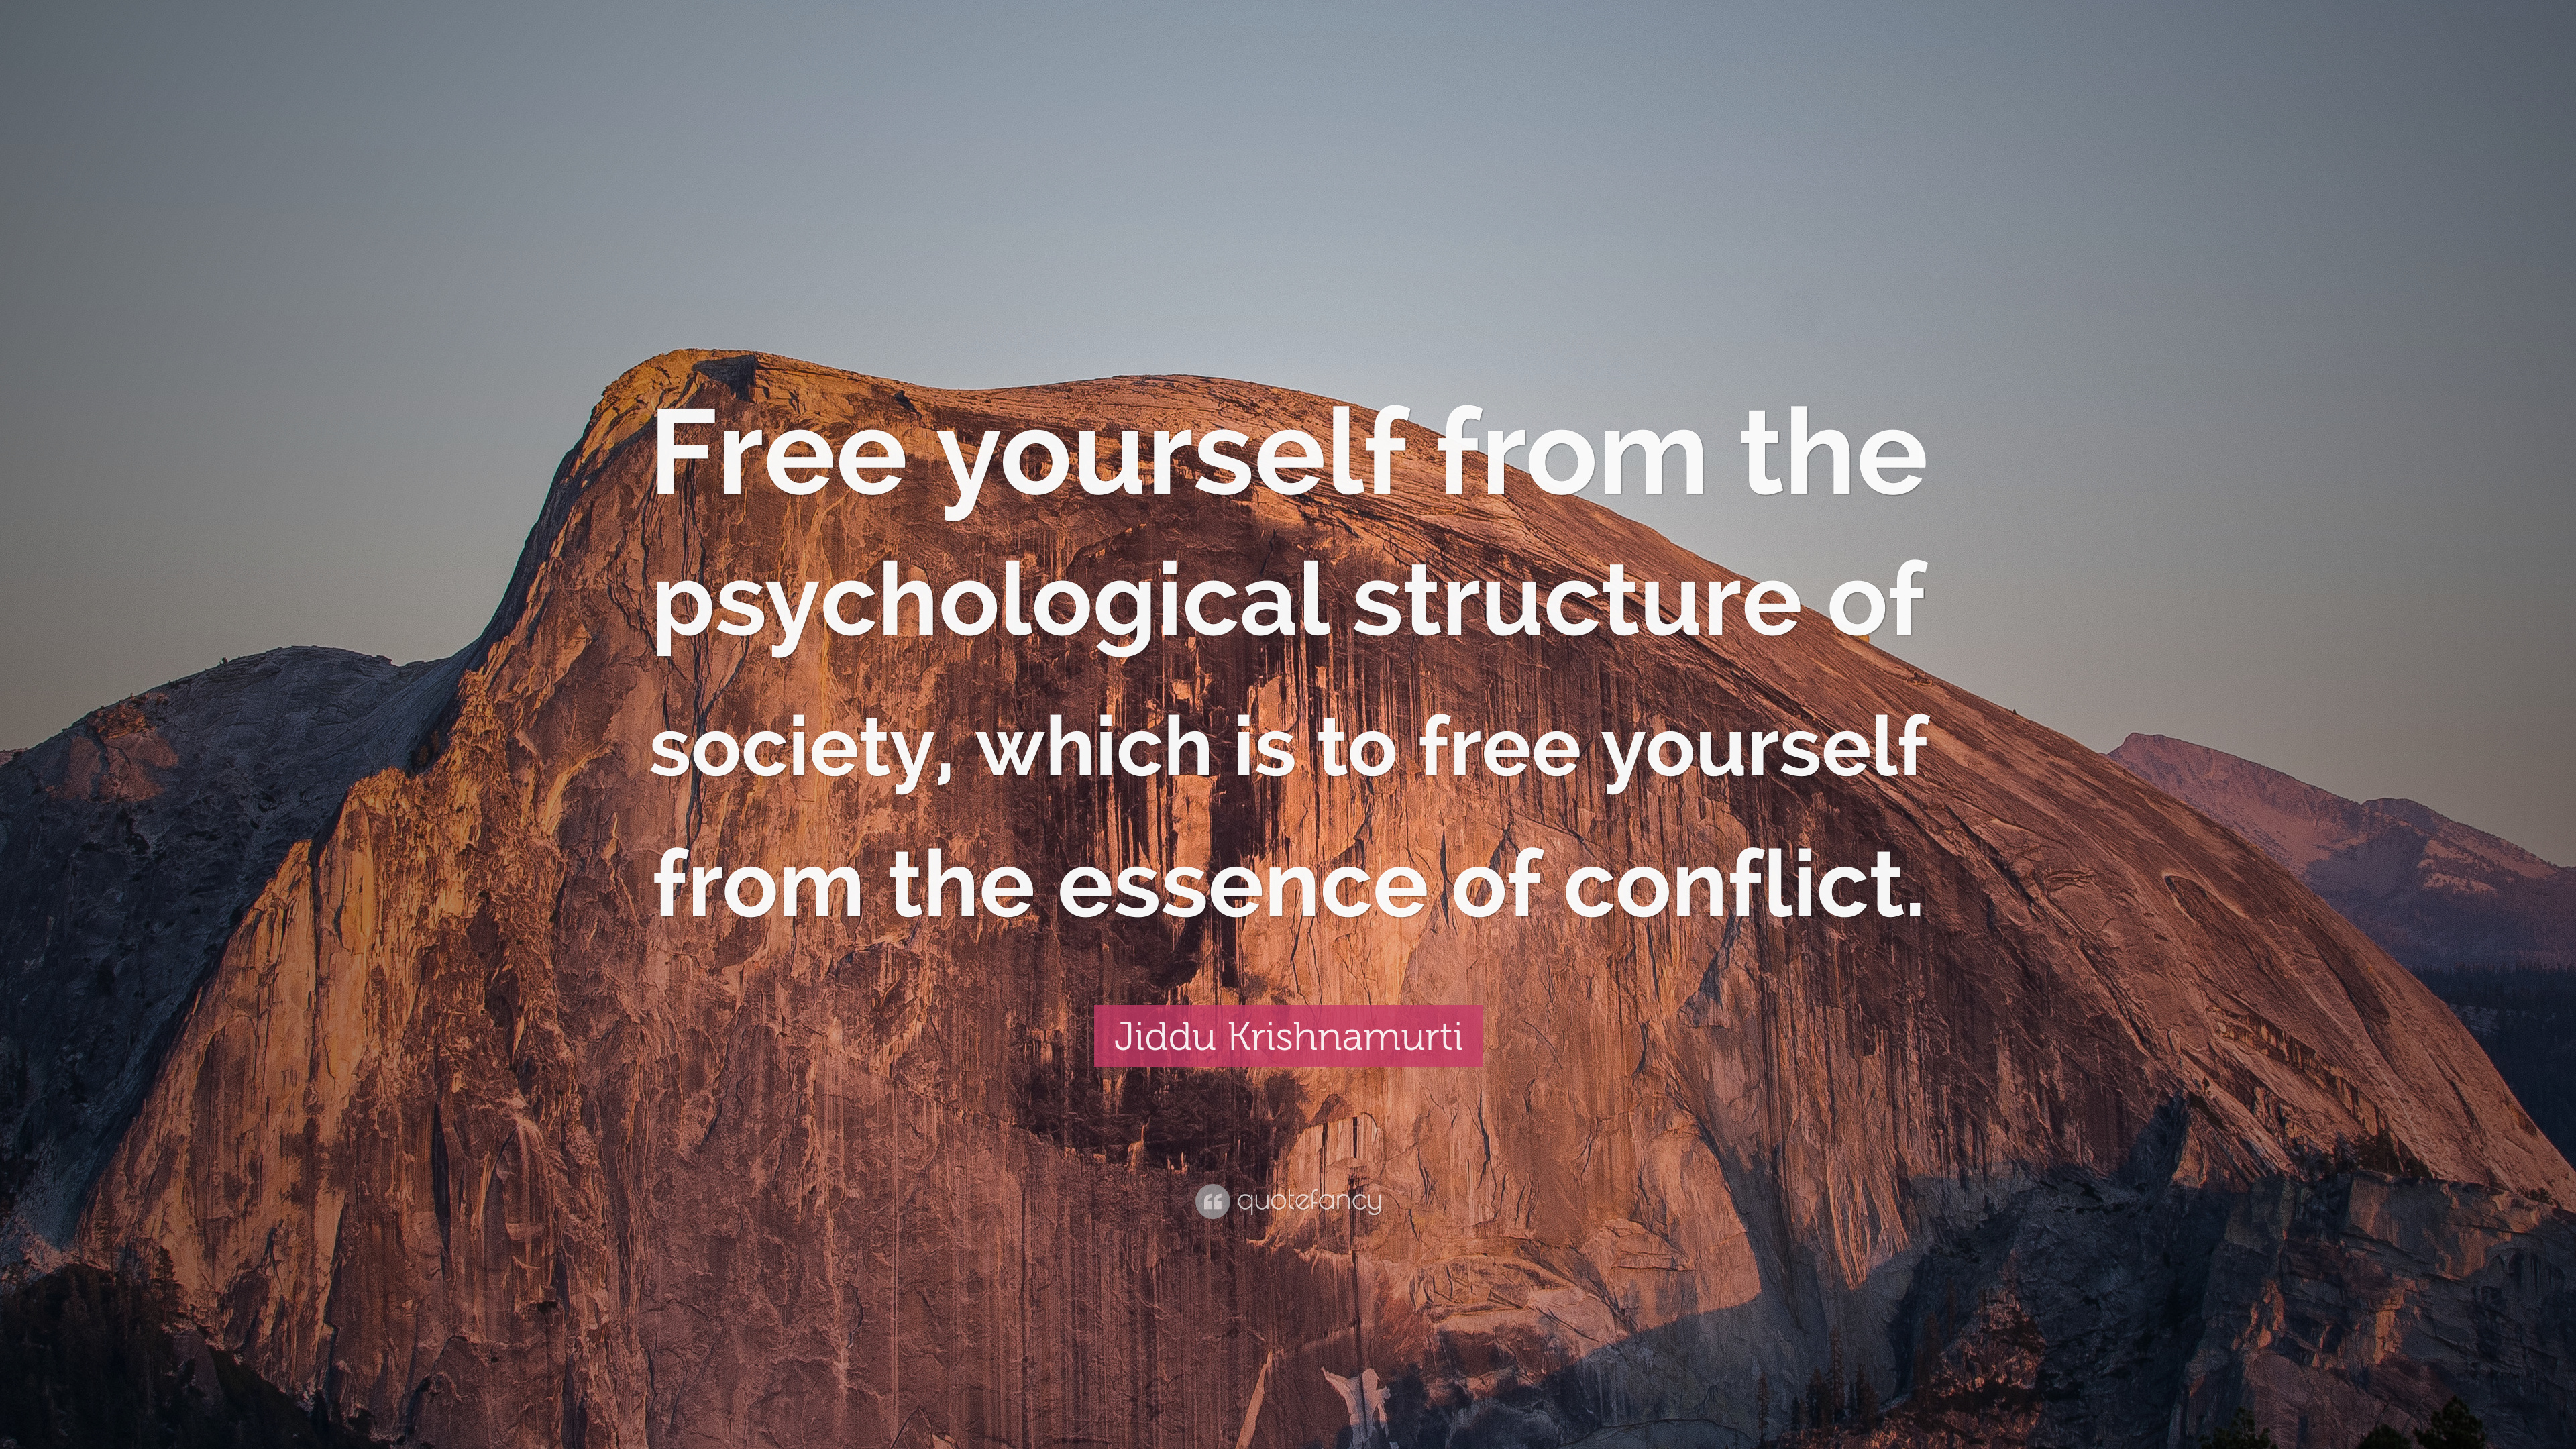 Jiddu Krishnamurti Quote “Free yourself from the psychological